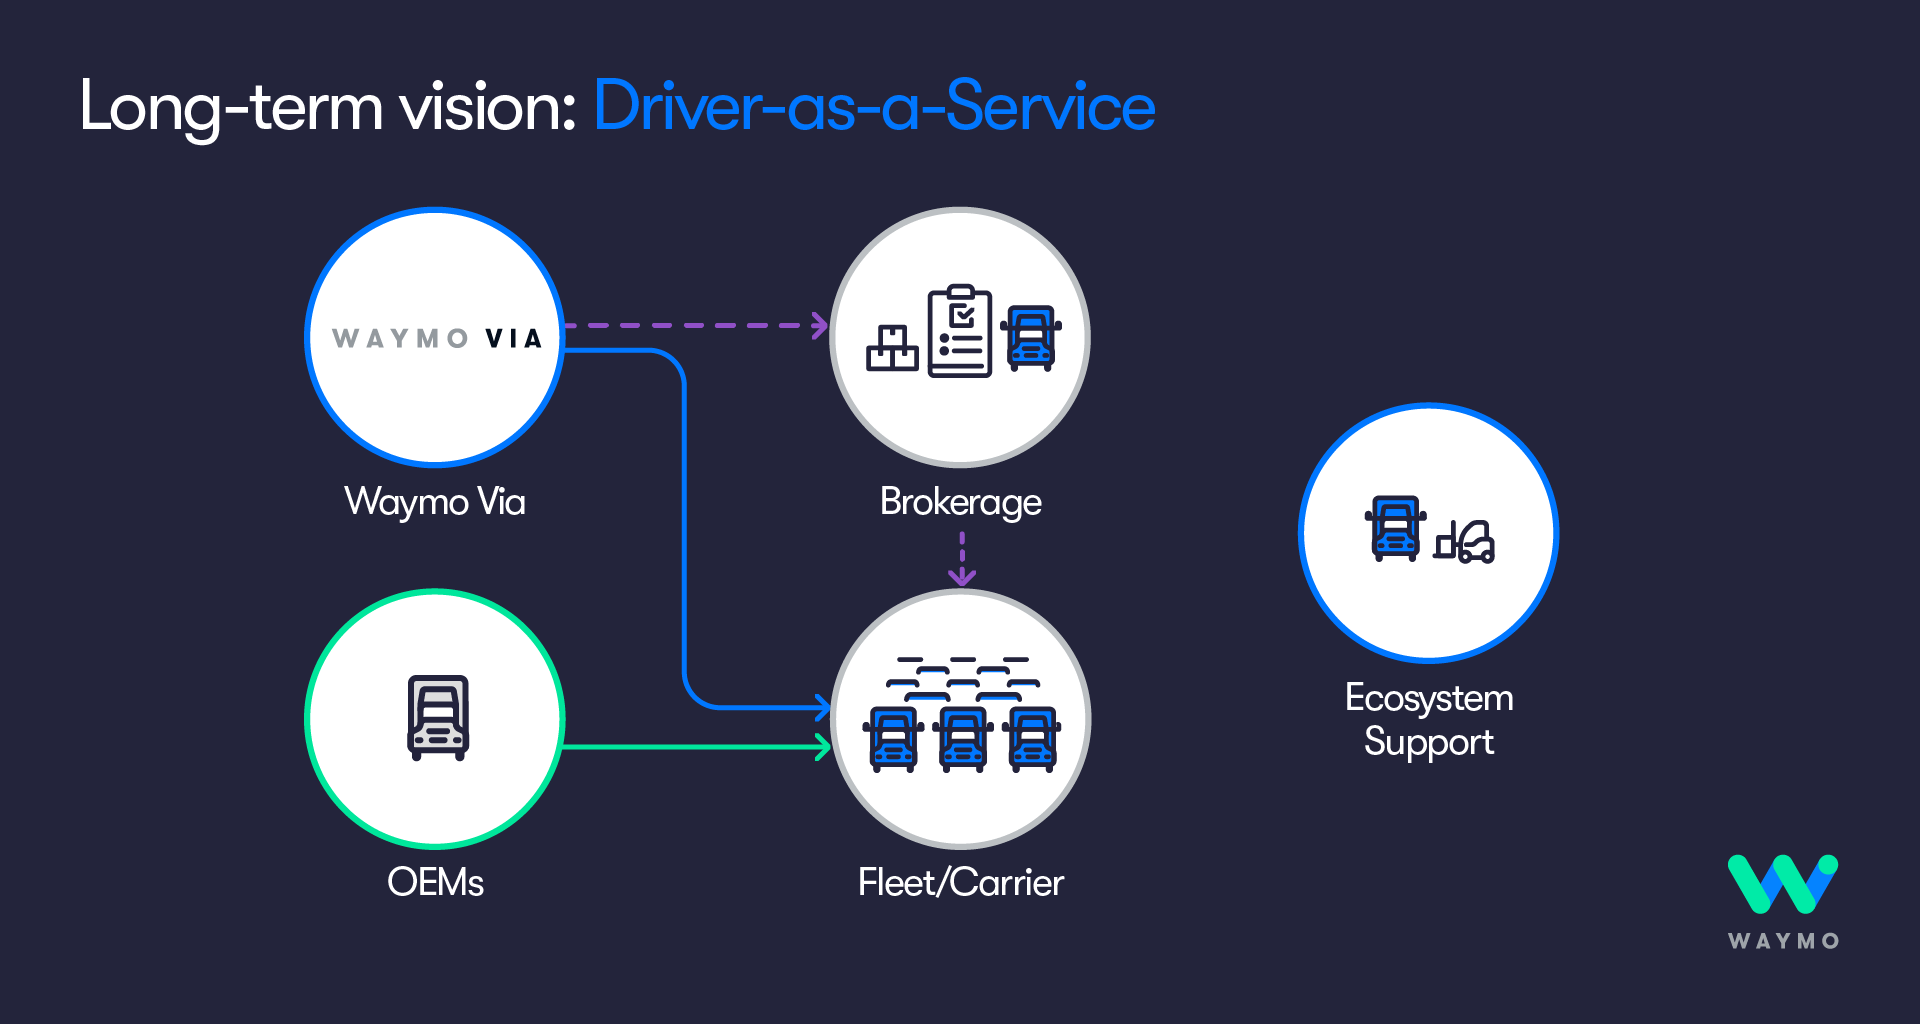 Long term vision for Driver as a Service